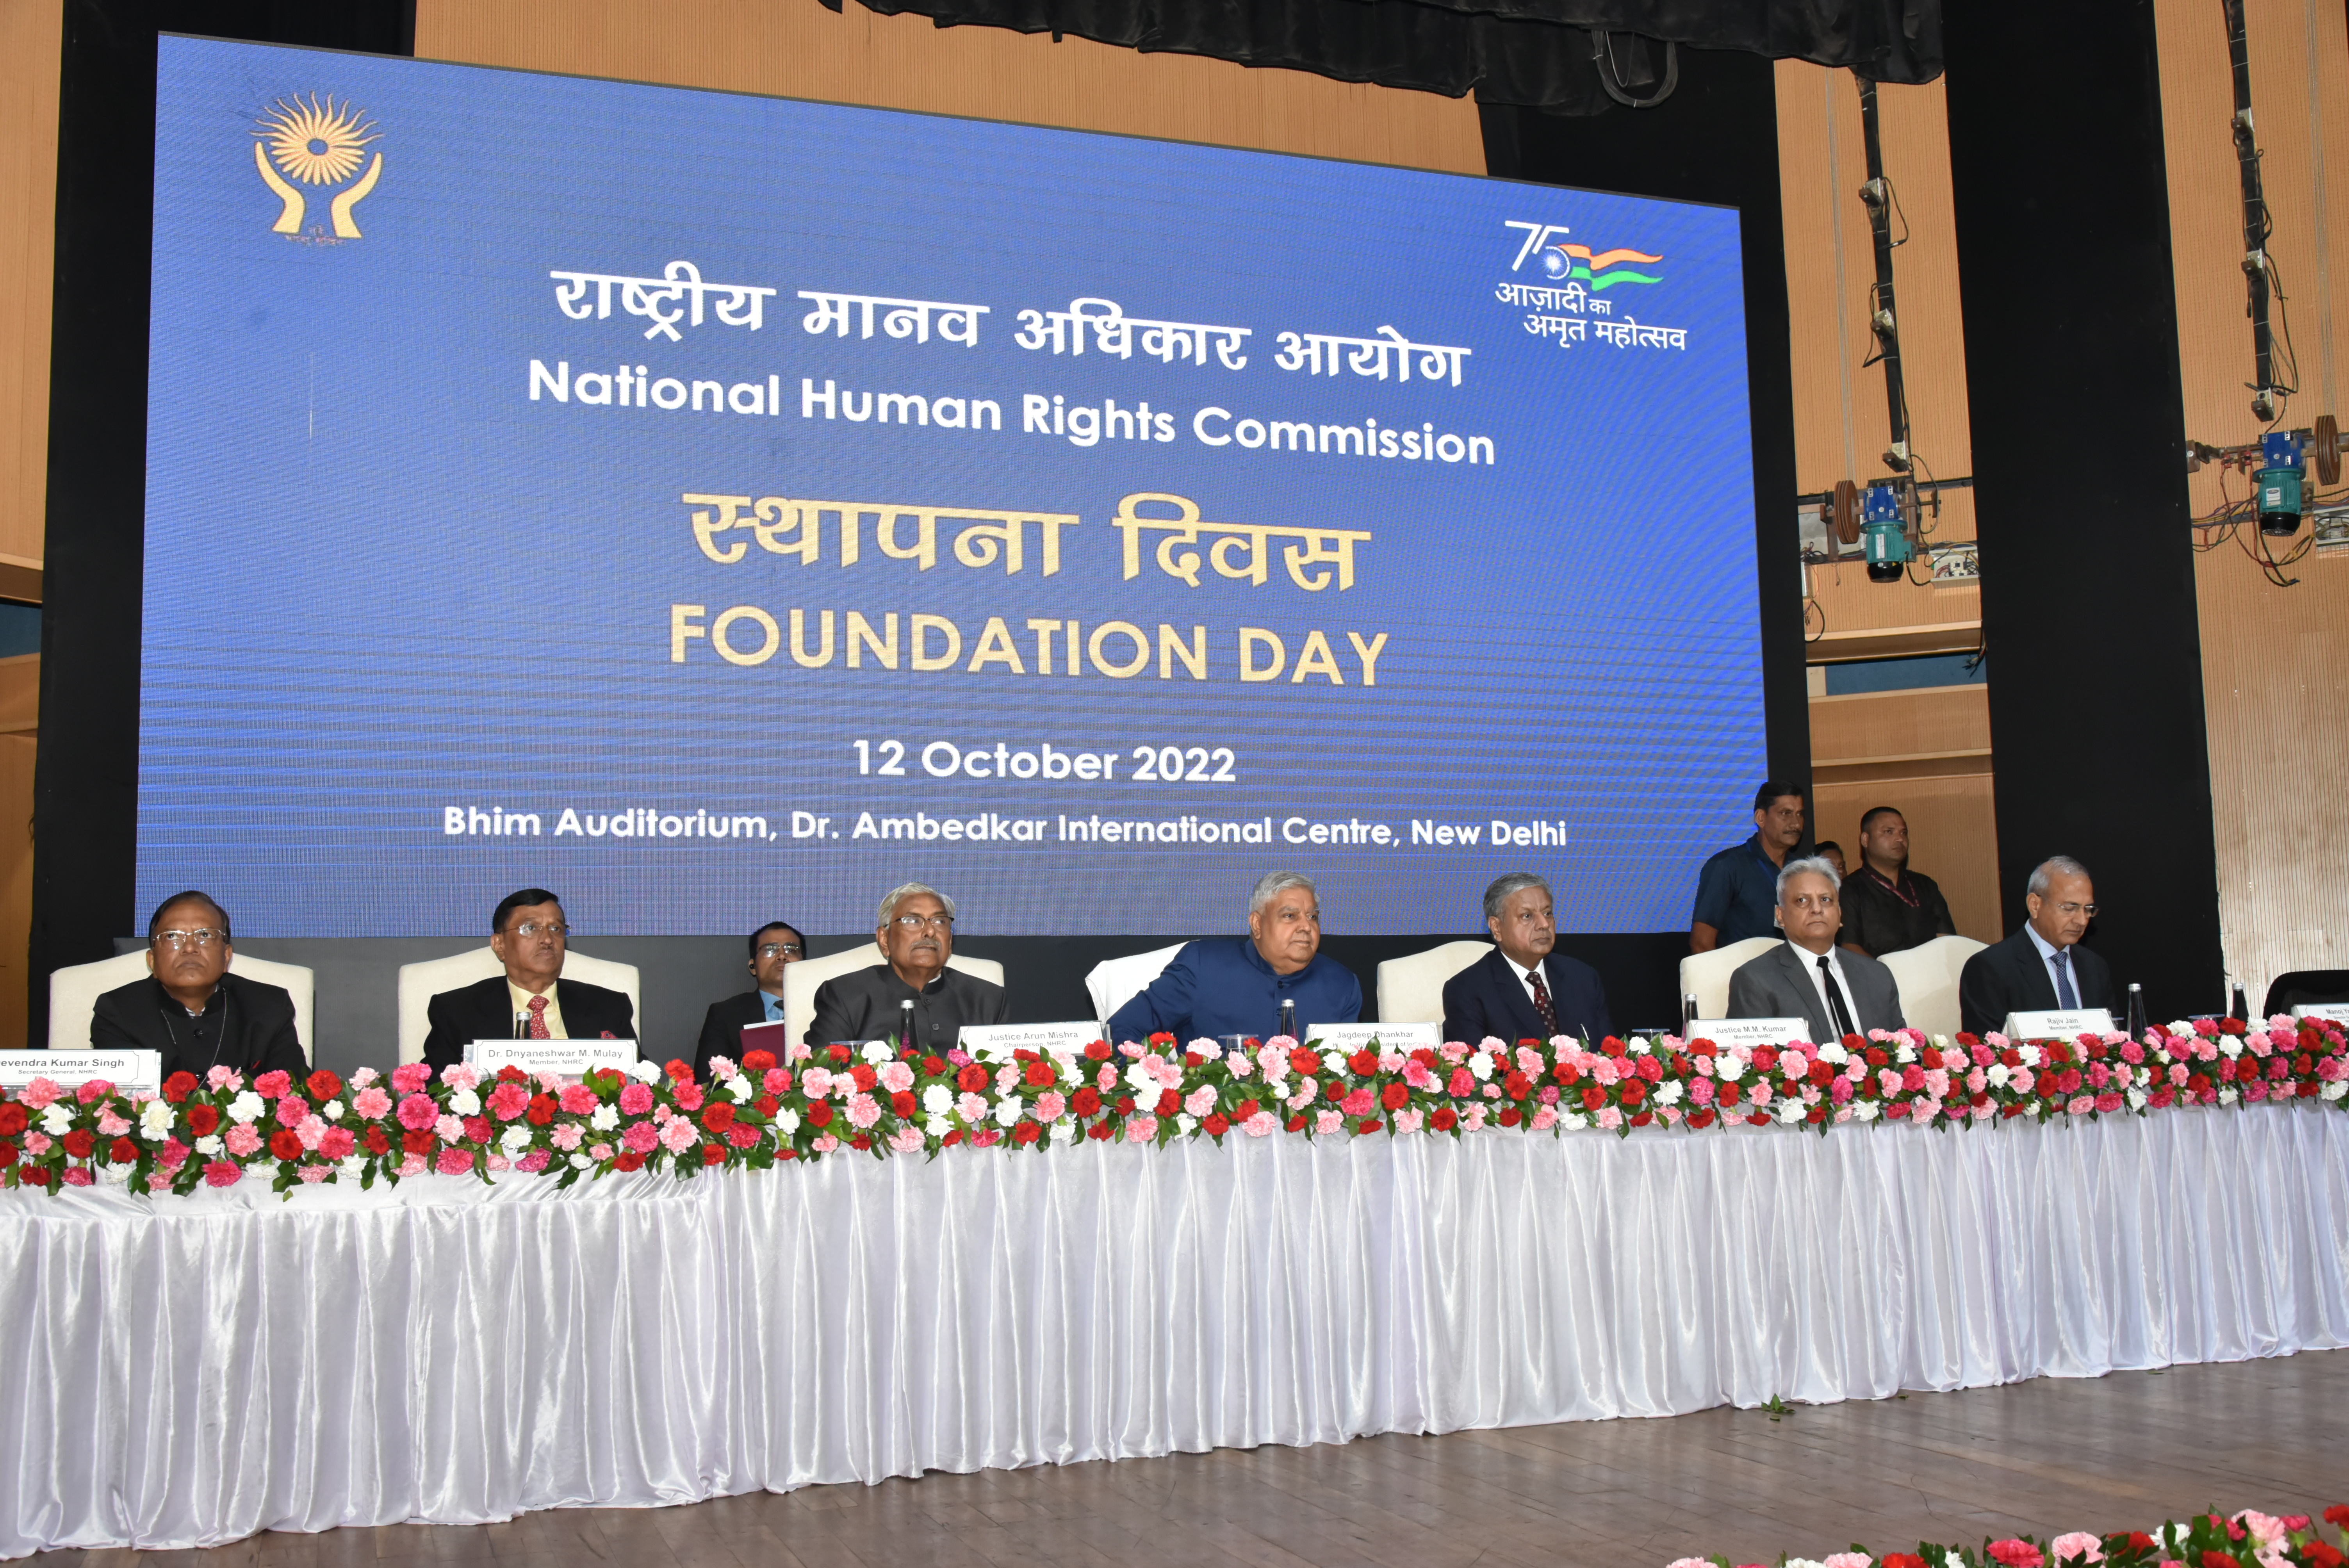 The Vice President, Shri Jagdeep Dhankhar attending the Foundation Day Celebrations of National Human Rights Commission in New Delhi on 12 October 2022.